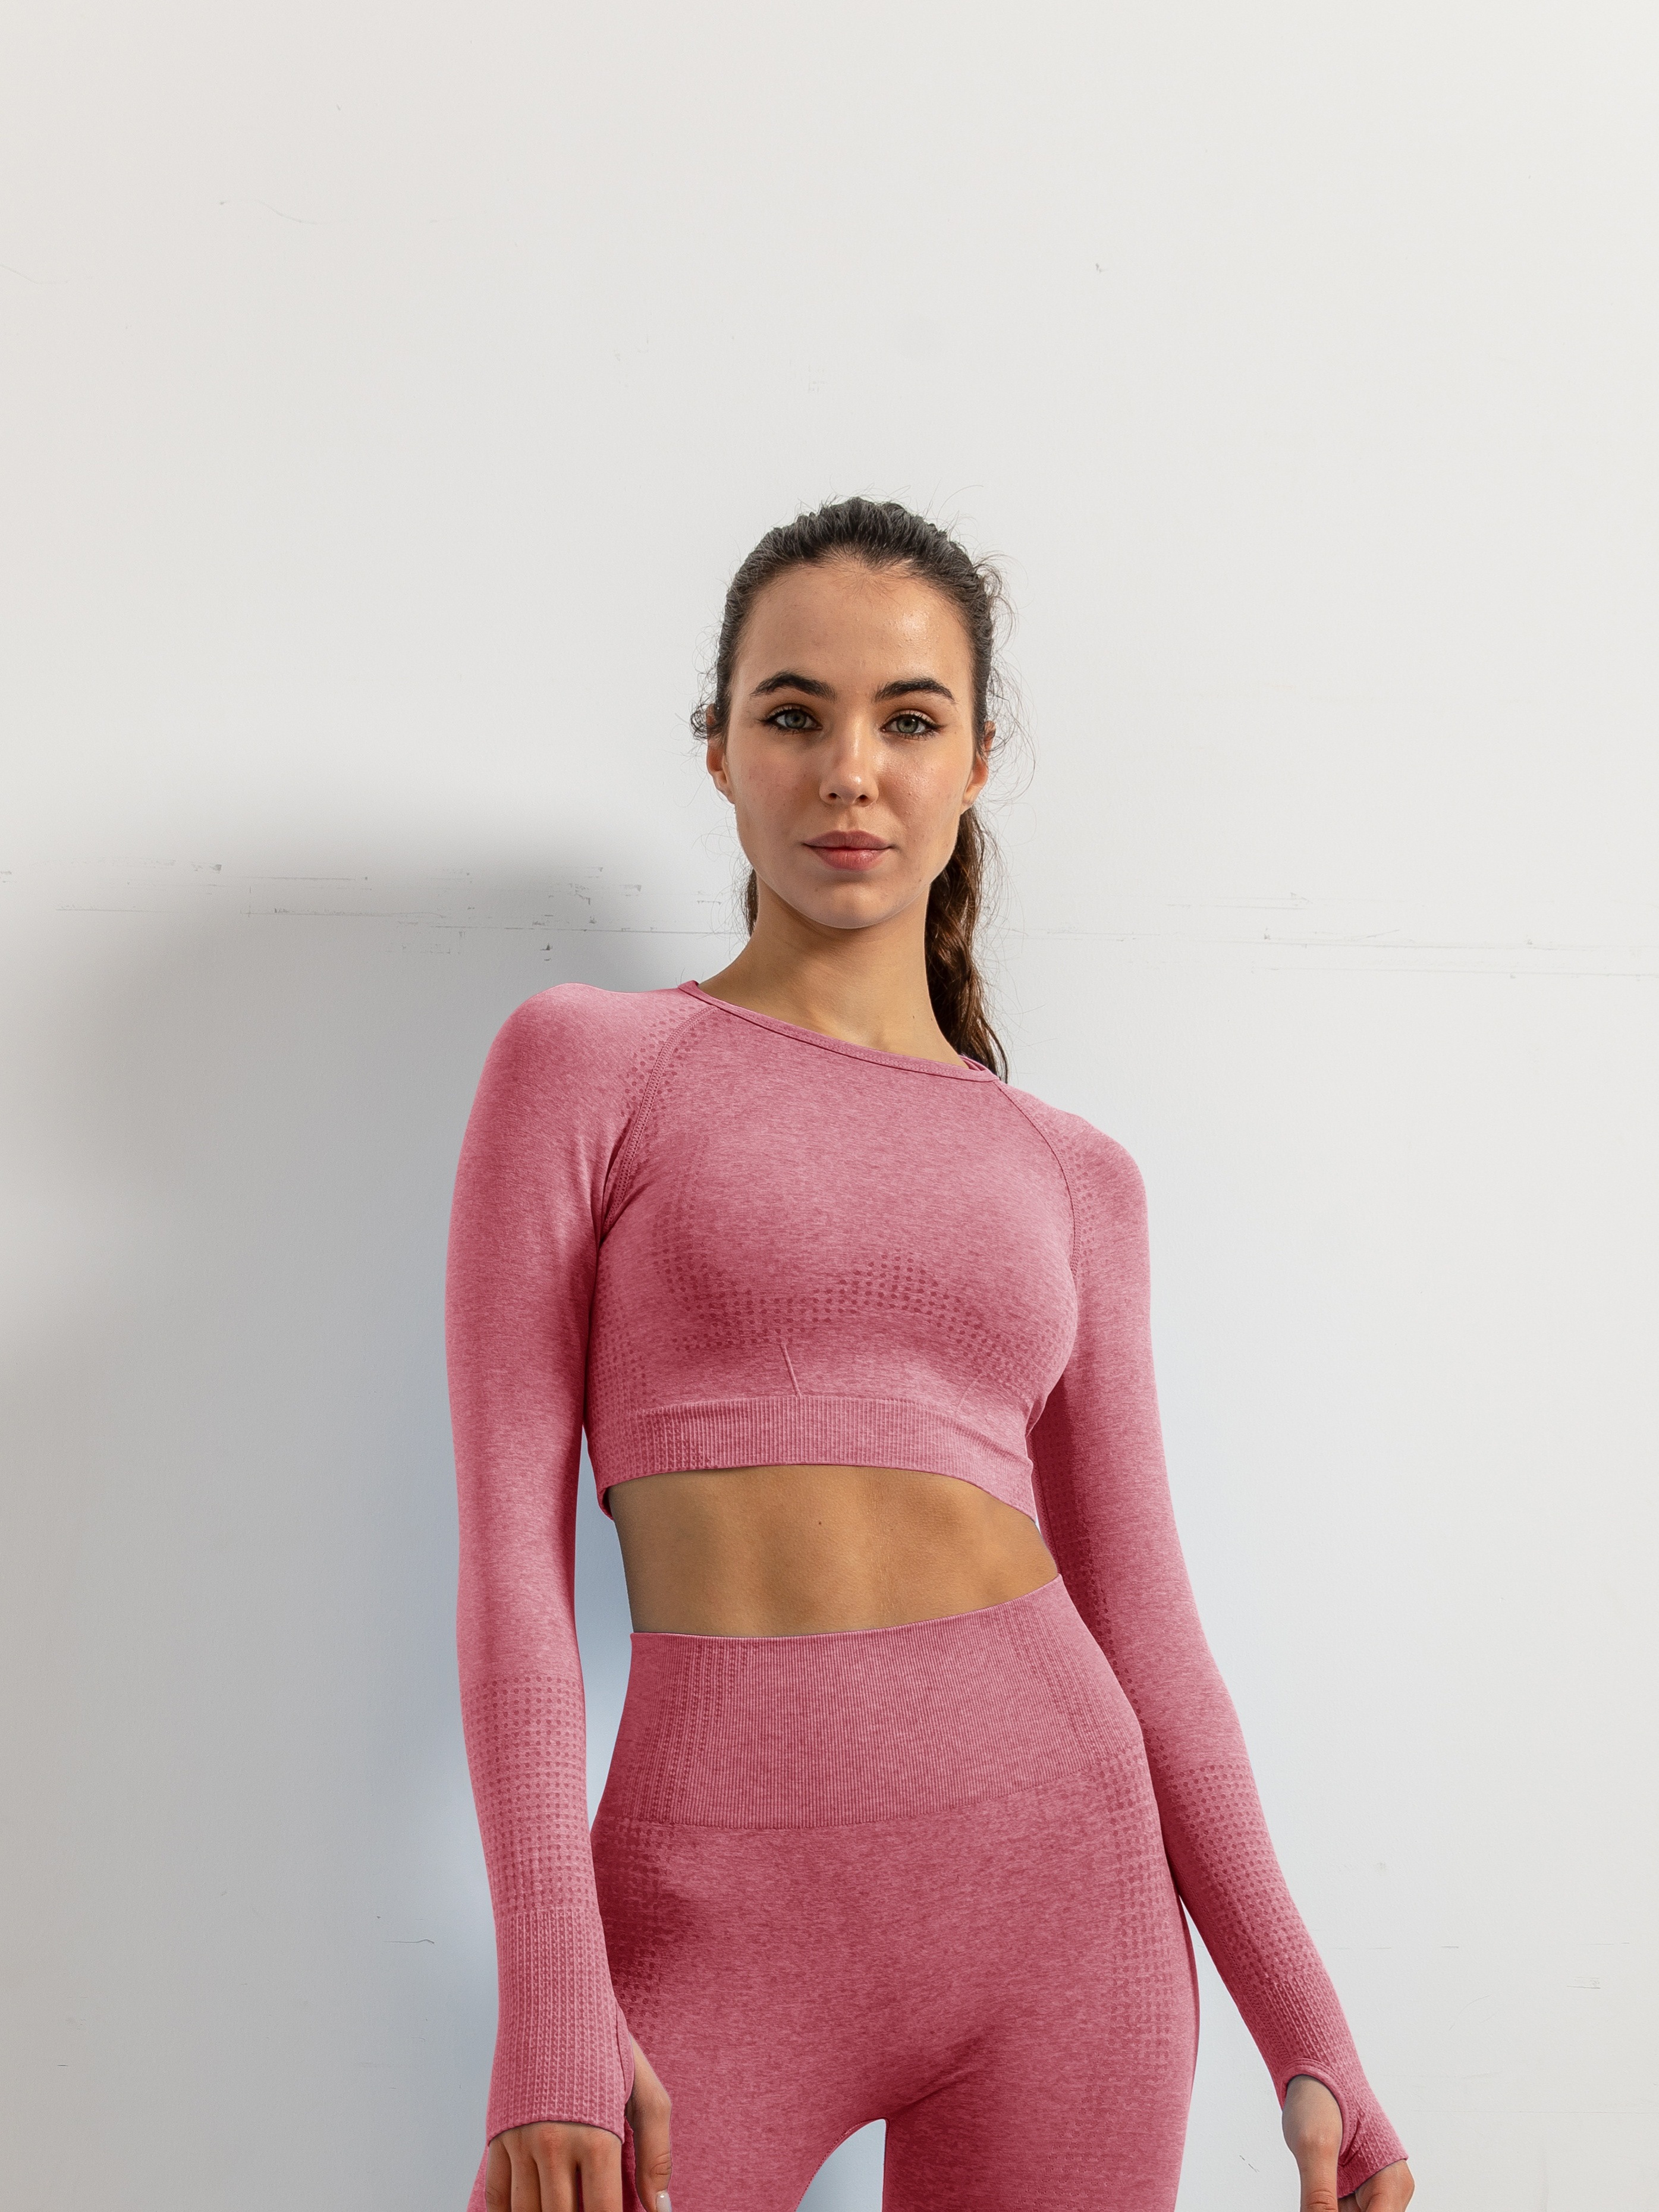 Women Cutout Yoga Crop Tops Long Sleeve Stretch Gym Workout Casual Shrugs  Athletic Sports Super Cropped Sweatshirt Tank Top at  Women's  Clothing store